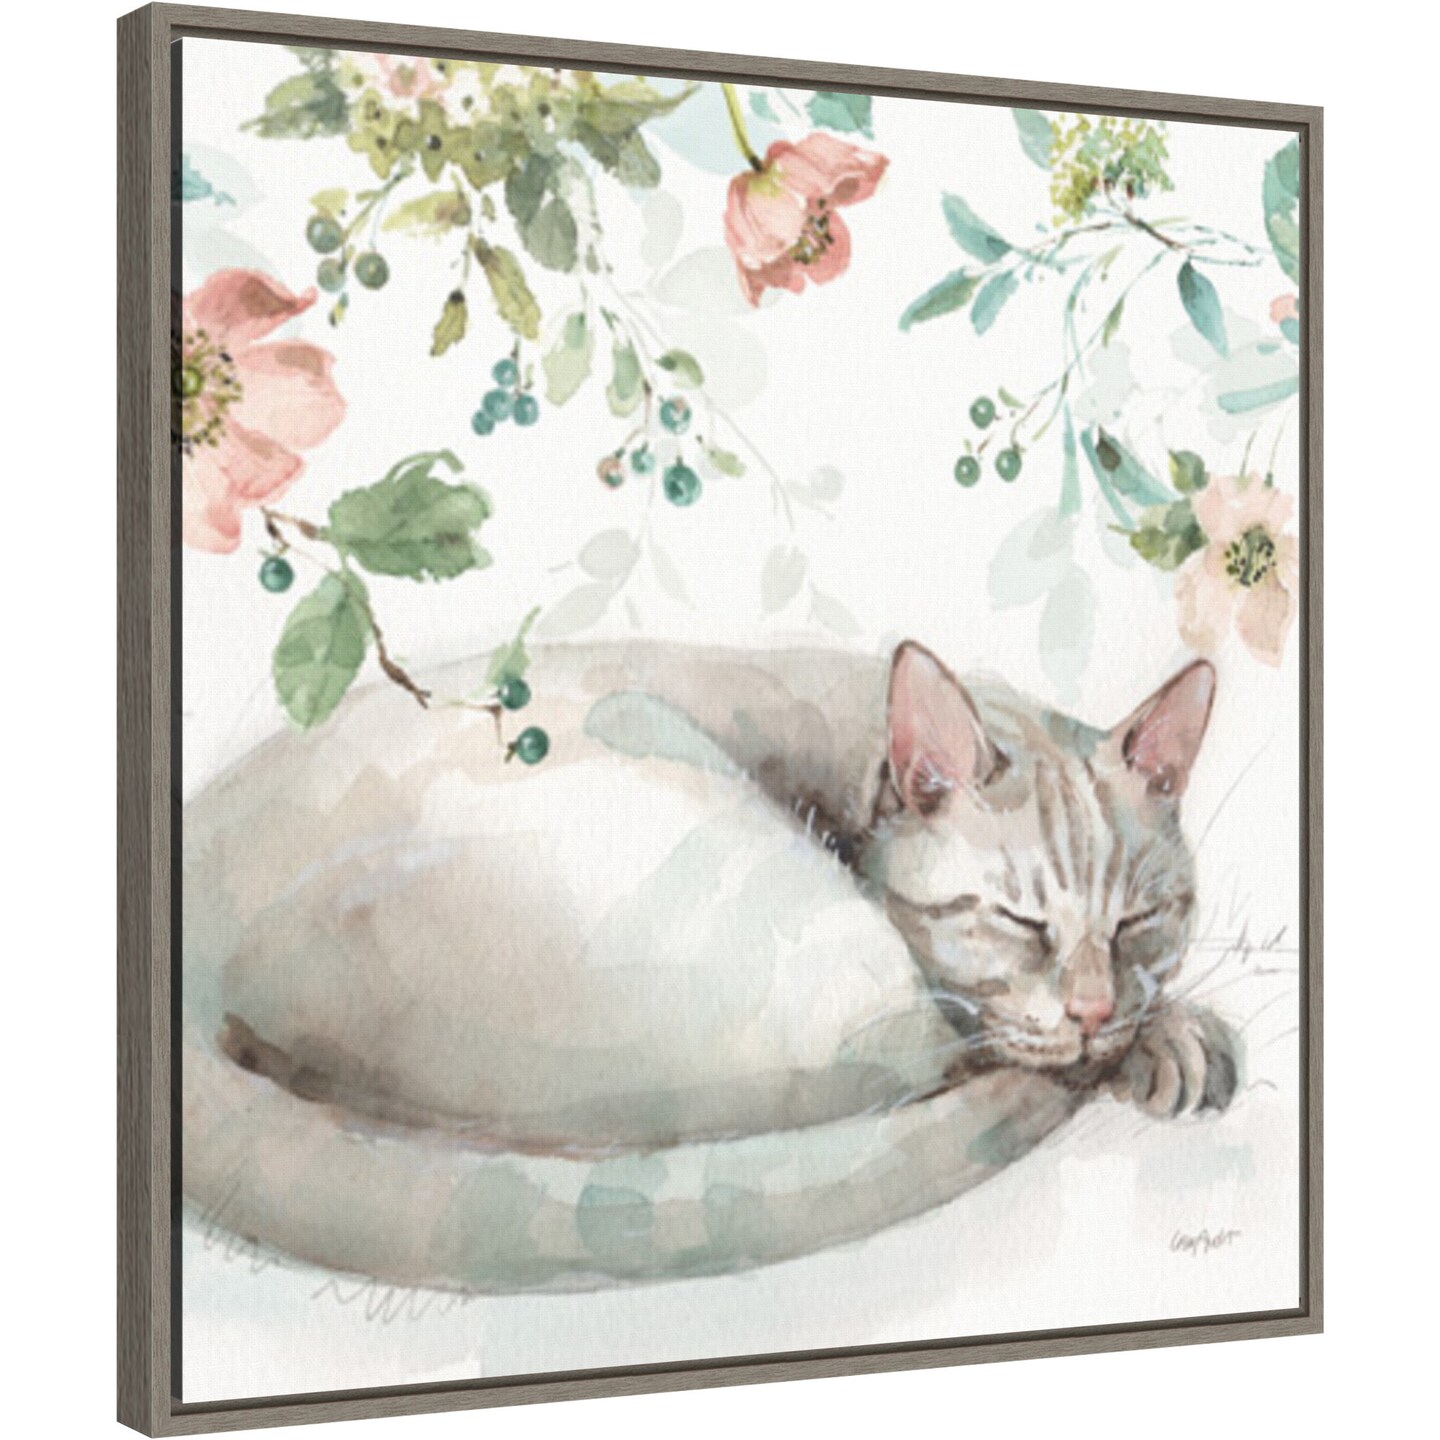 Mint Crush 15 by Lisa Audit 22-in. W x 22-in. H. Canvas Wall Art Print Framed in Grey